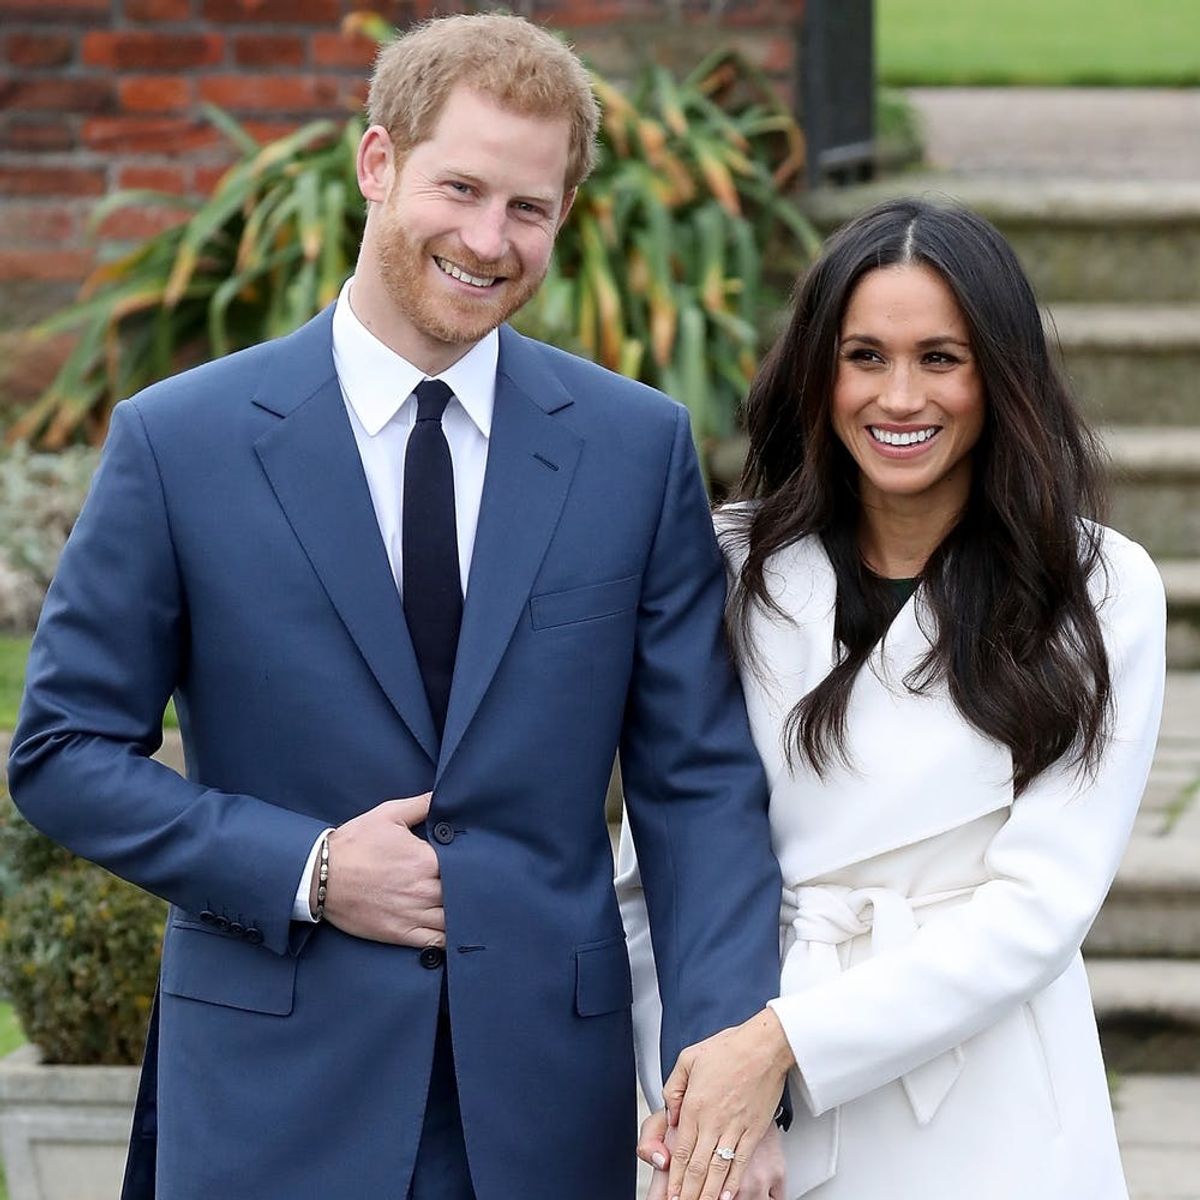 Prince Harry and Meghan Markle Are Inviting Thousands of Members of the Public to Their Wedding